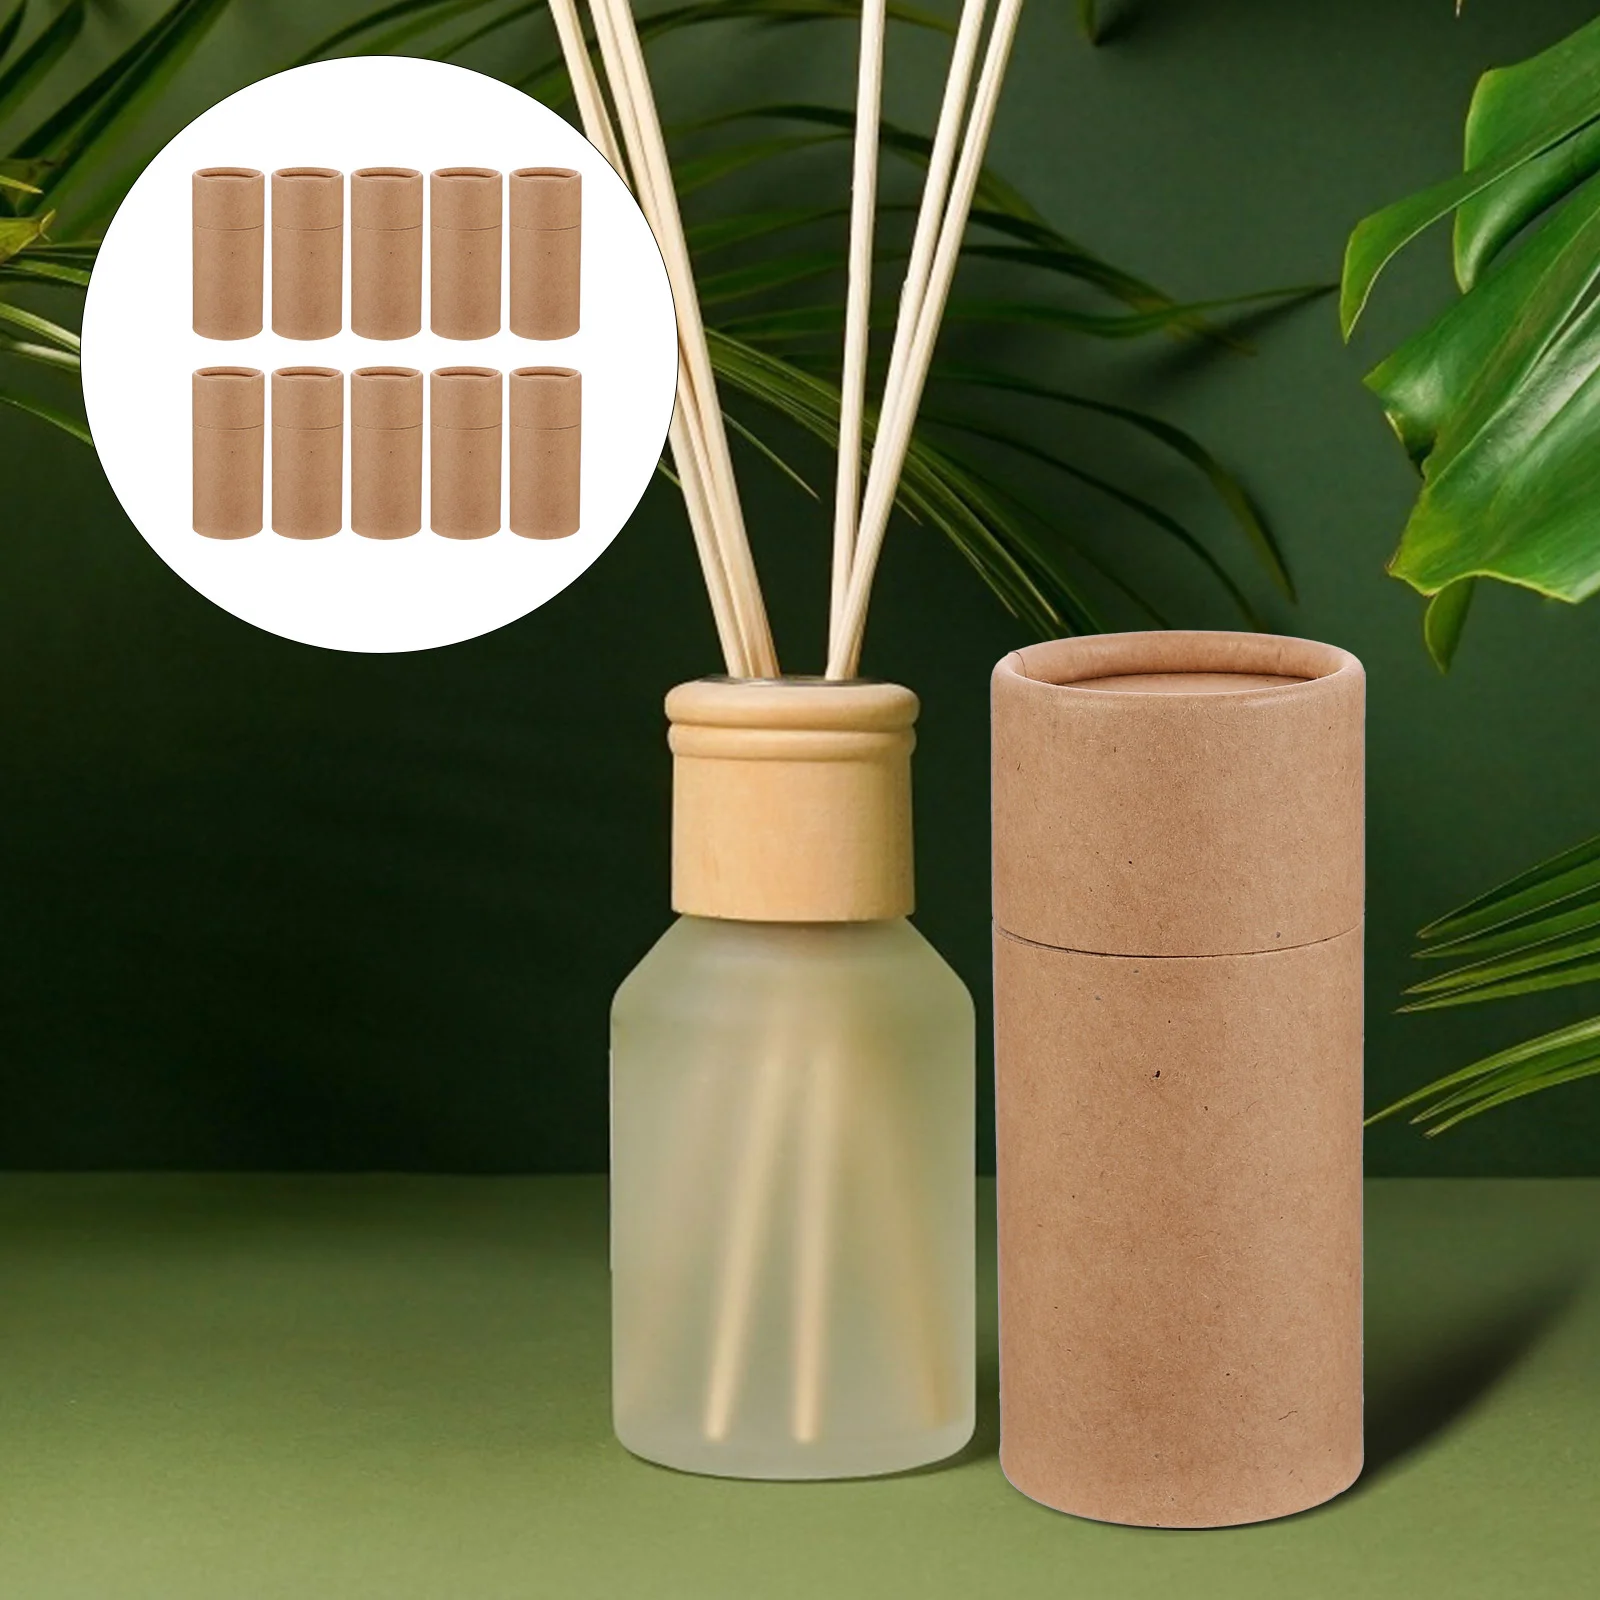 

10 Pcs Travel Deodorant Gift Paper Tube Packing Box Tube Gift Box Essential Oil Bottle Box Cylinder Cardboard Boxes